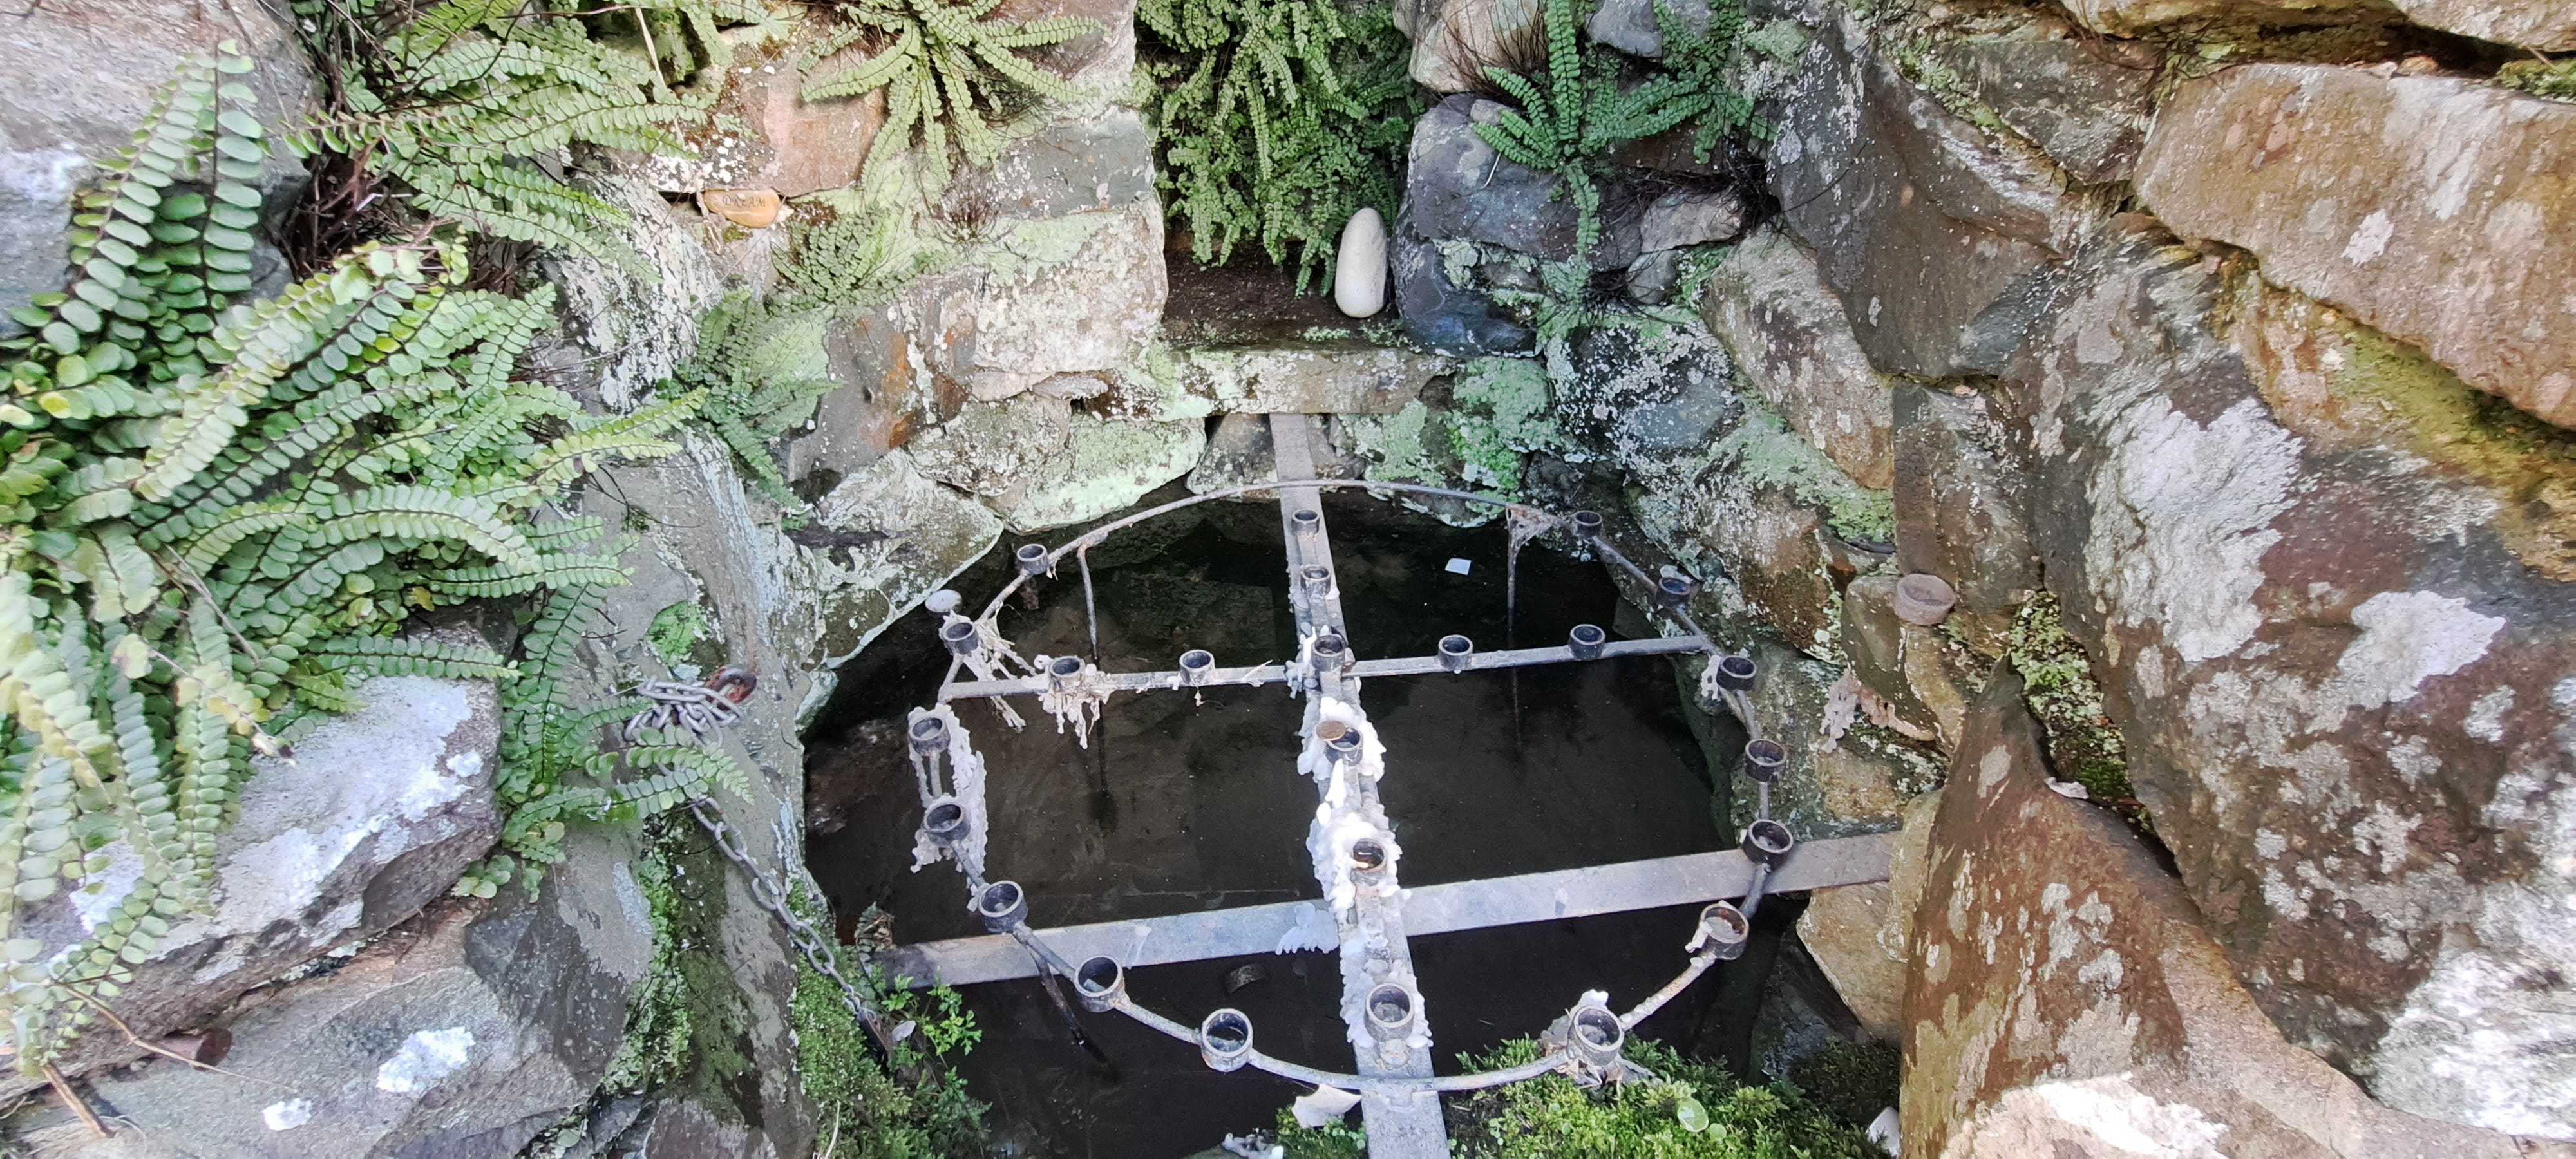 Inside Brigid's well at Raffony: still dark pool of water is enclosed within a rough stone walled enclosure, an iron sconce is suspended directly above the water for holding many candles, dripping wax has set, some tealights are floating in the water, the walls have ferns growing out of them.